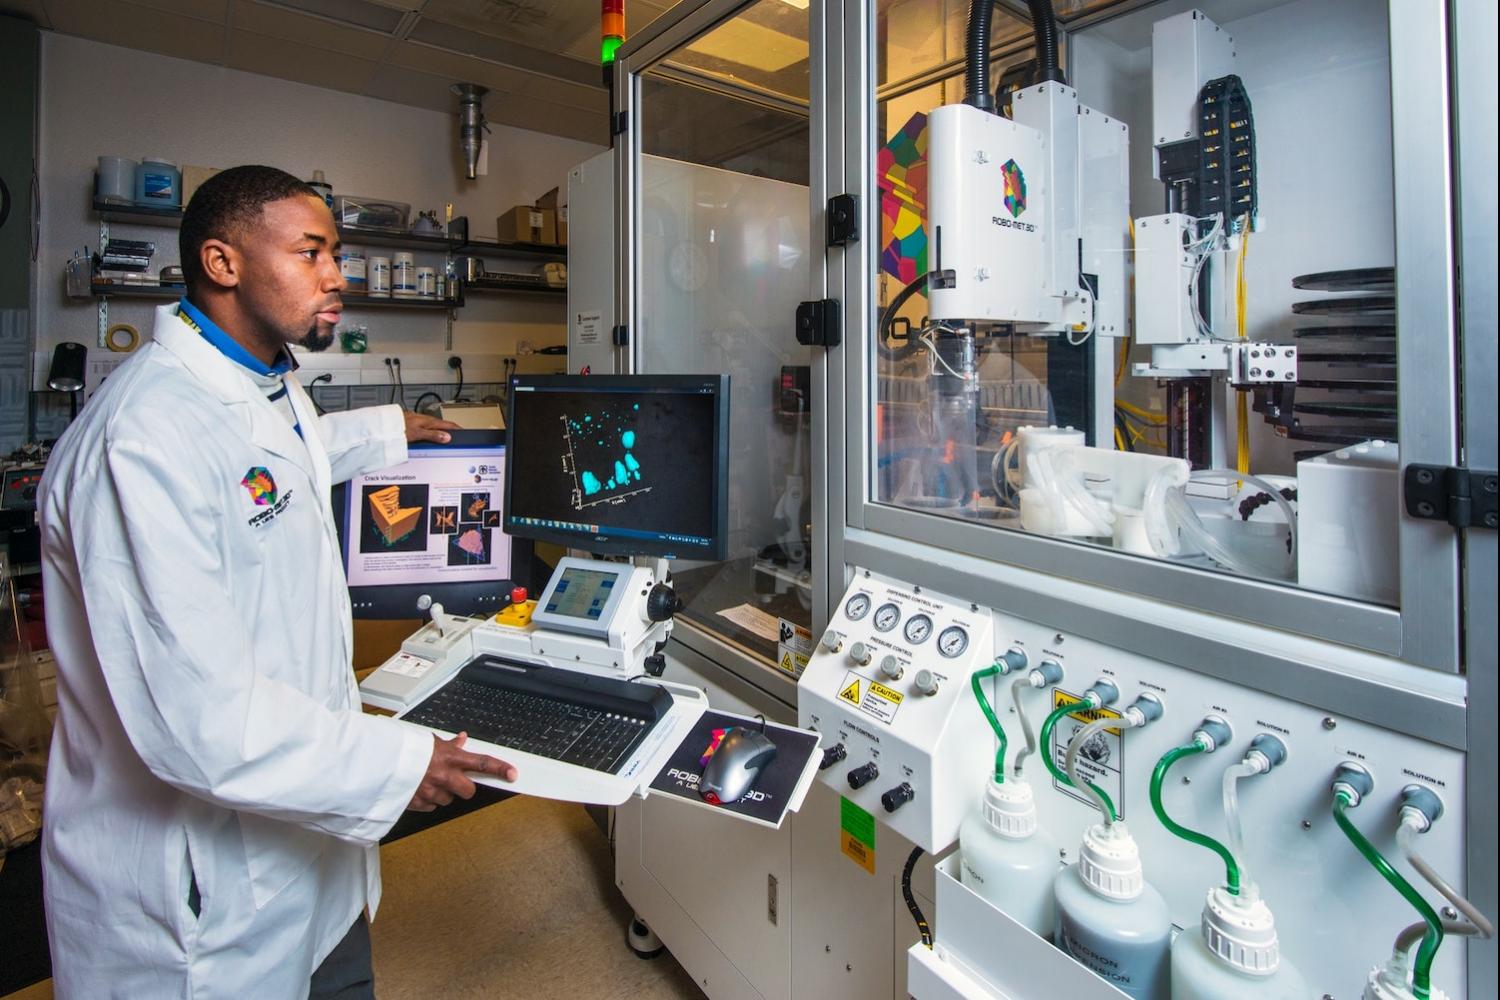 HBCUs work to bring more Black students into tech